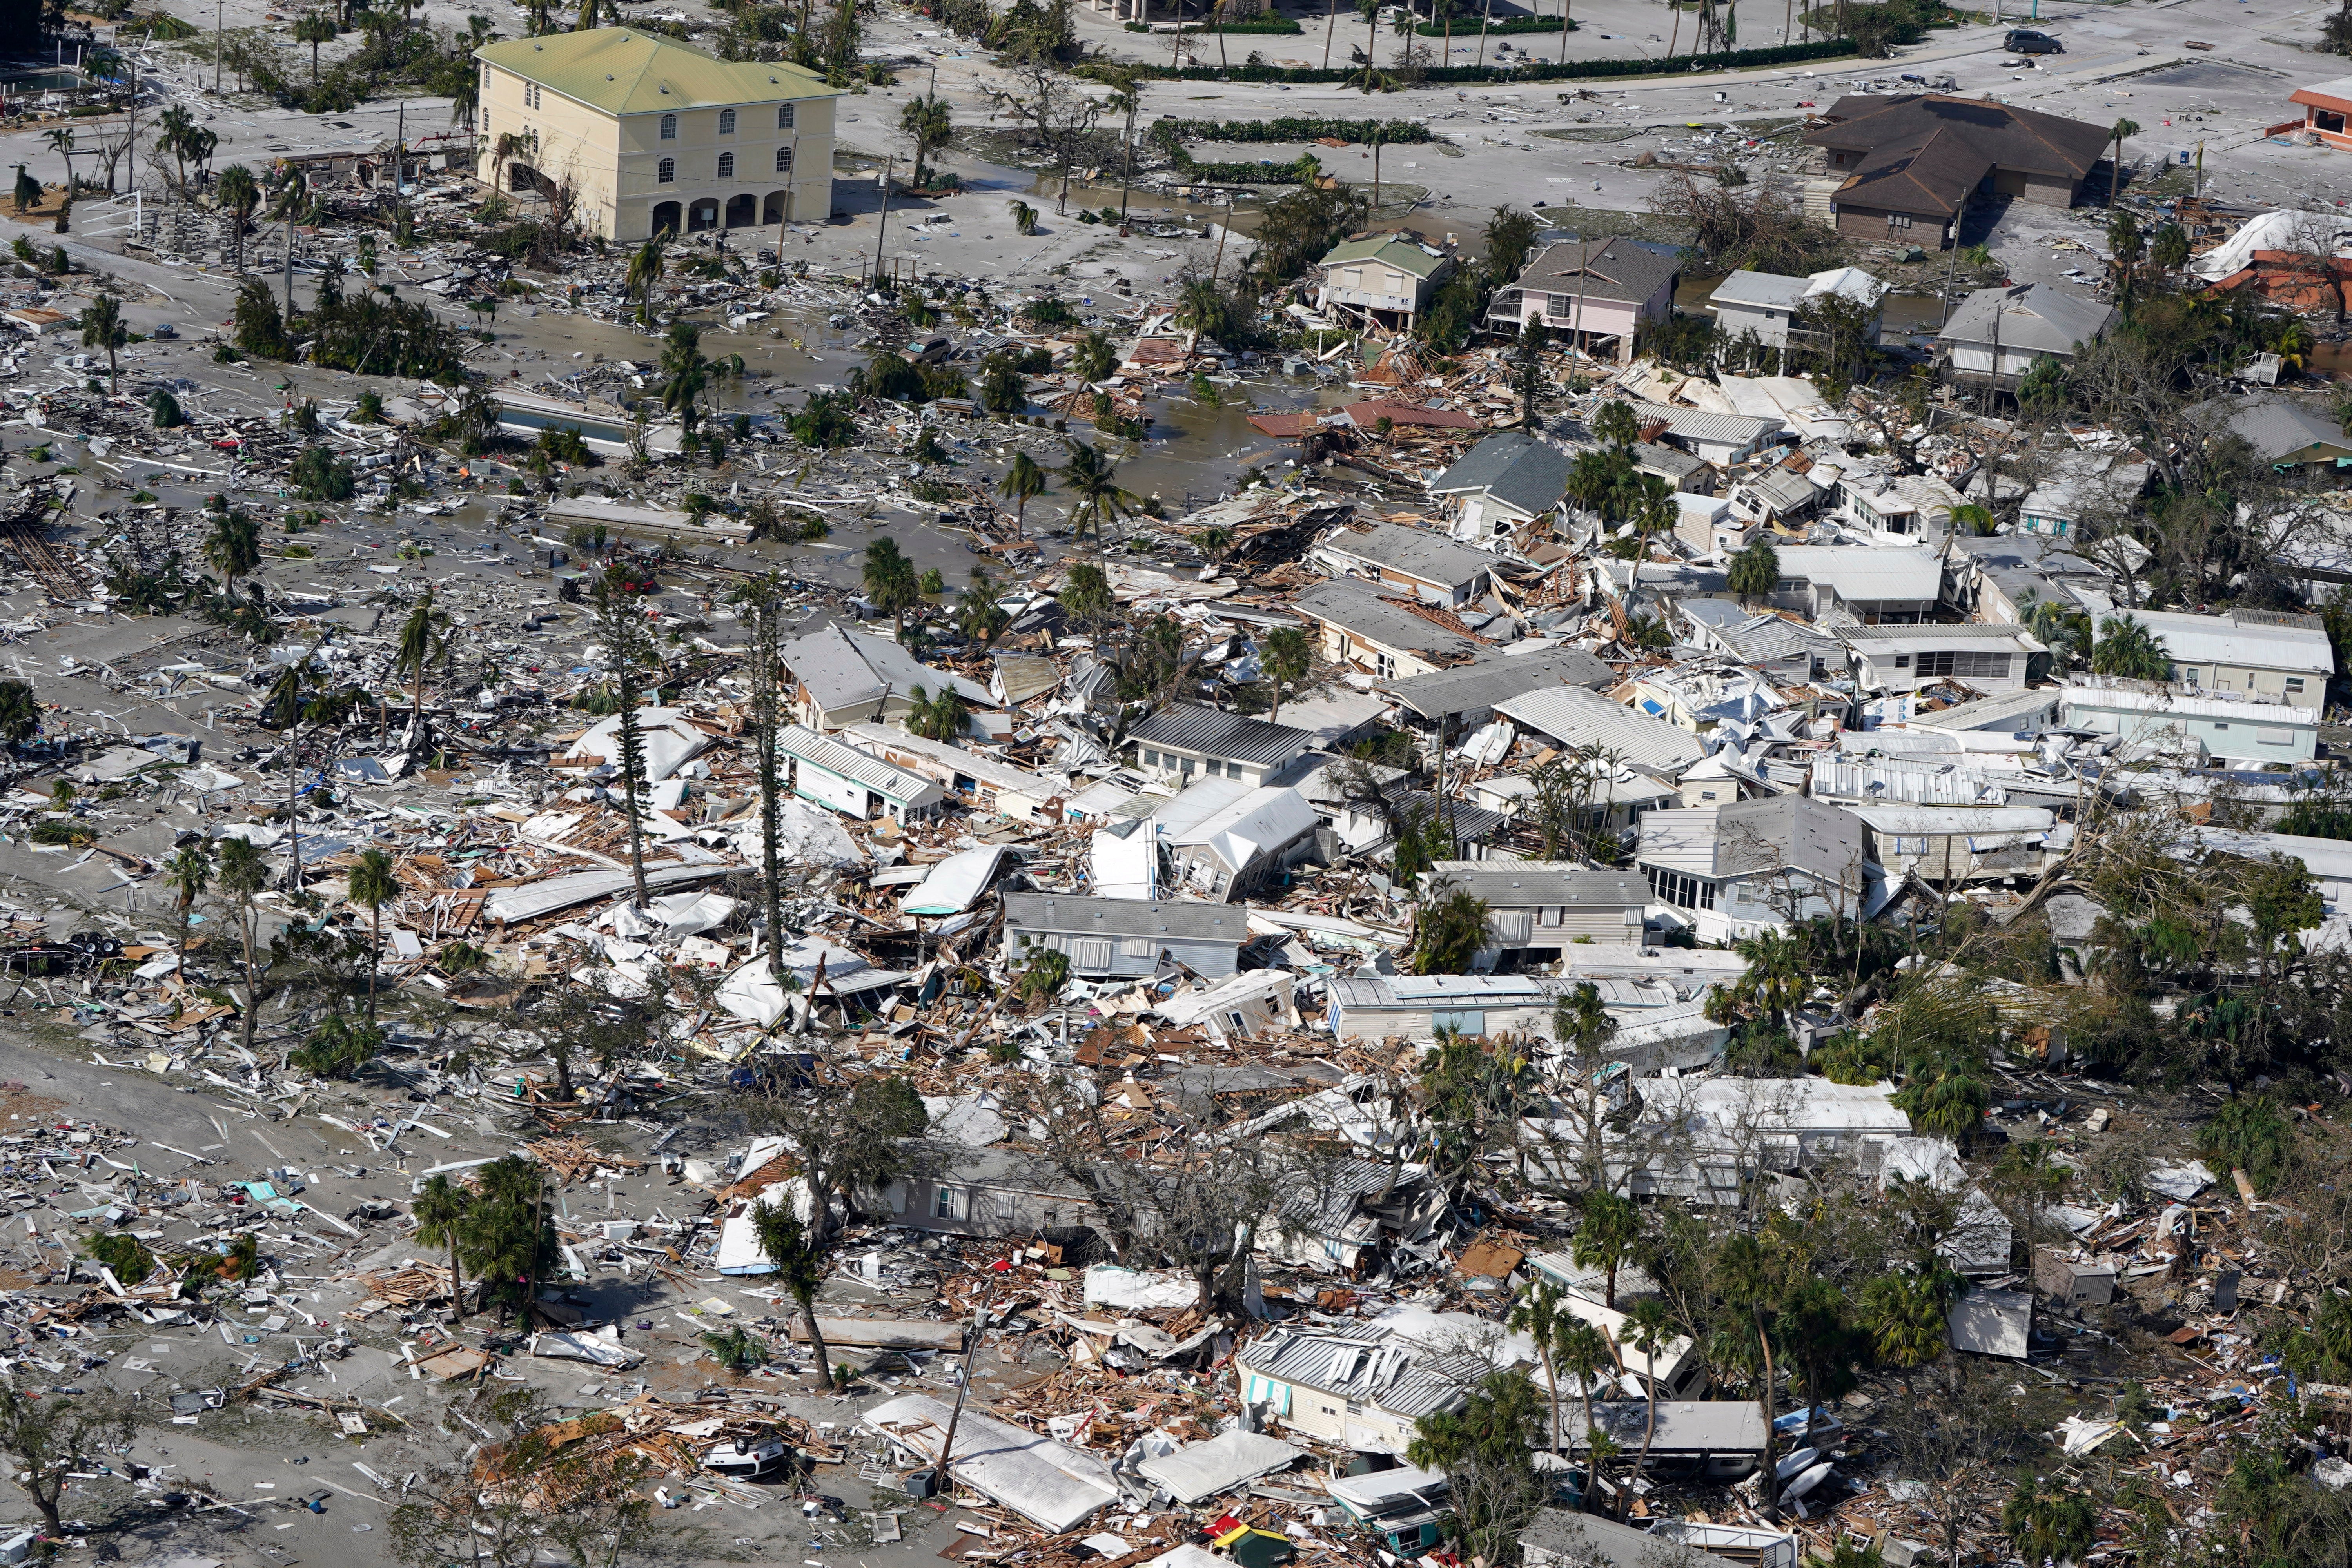 Damaged homes and debris are shown in the aftermath of the hurricane in Fort Myers